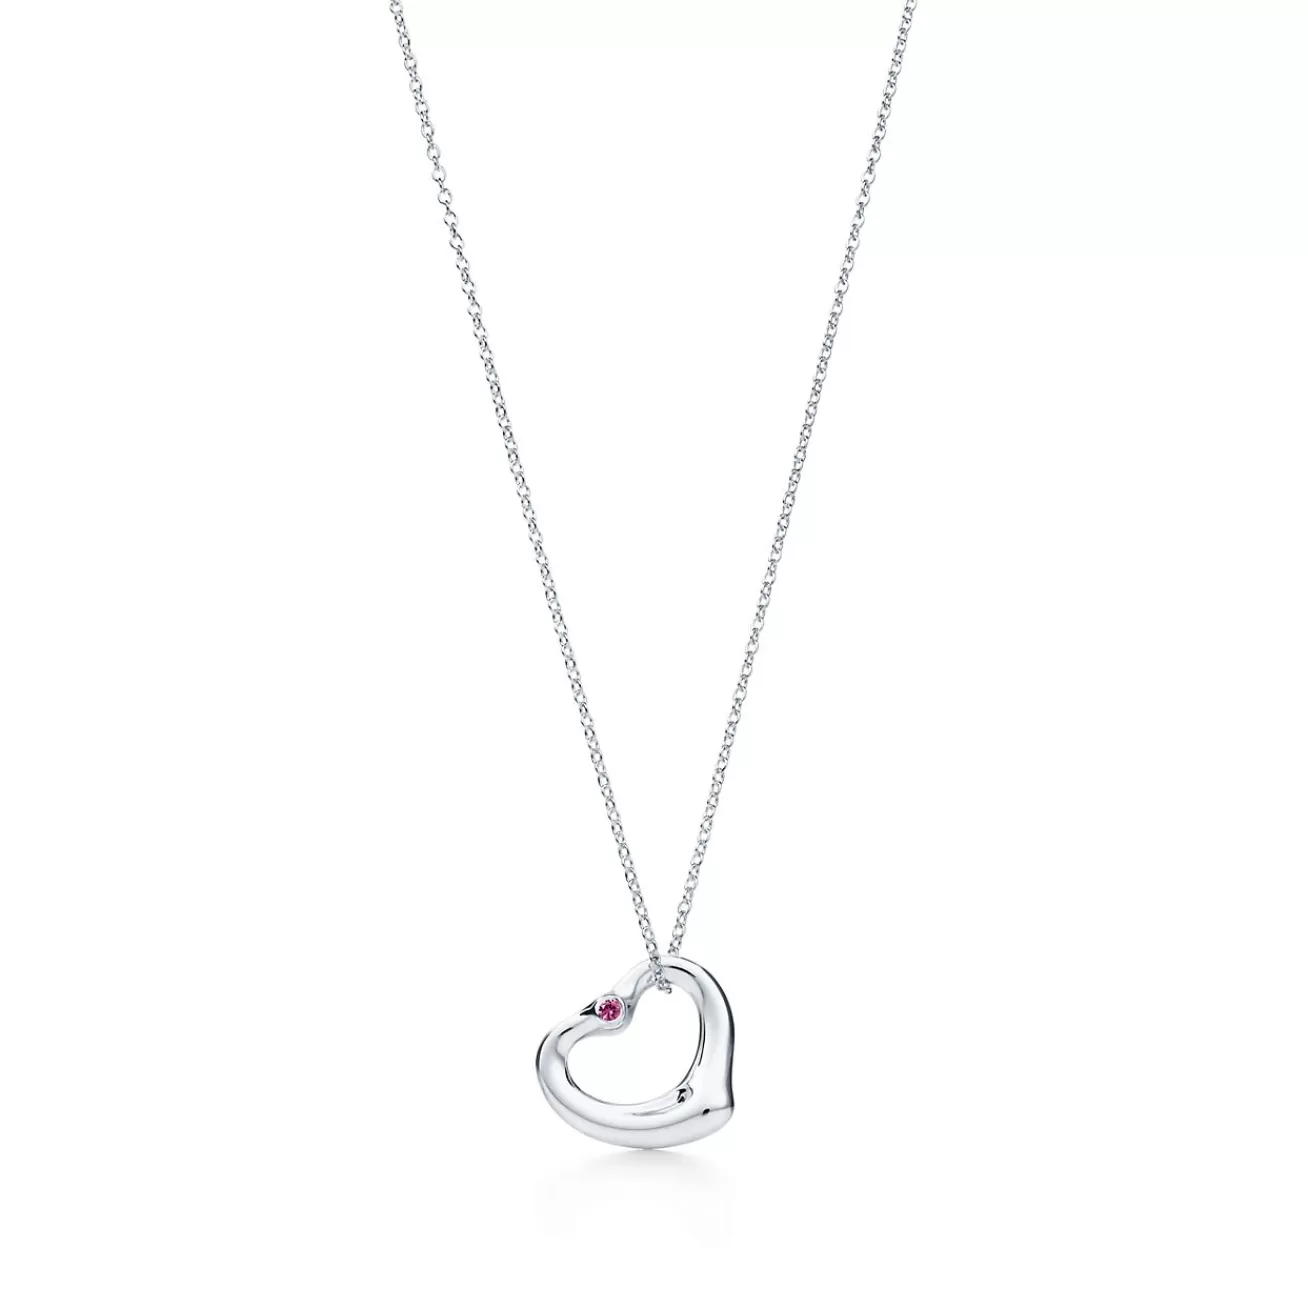 Tiffany & Co. Elsa Peretti® Open Heart pendant in sterling silver with a pink sapphire. | ^ Necklaces & Pendants | Sterling Silver Jewelry